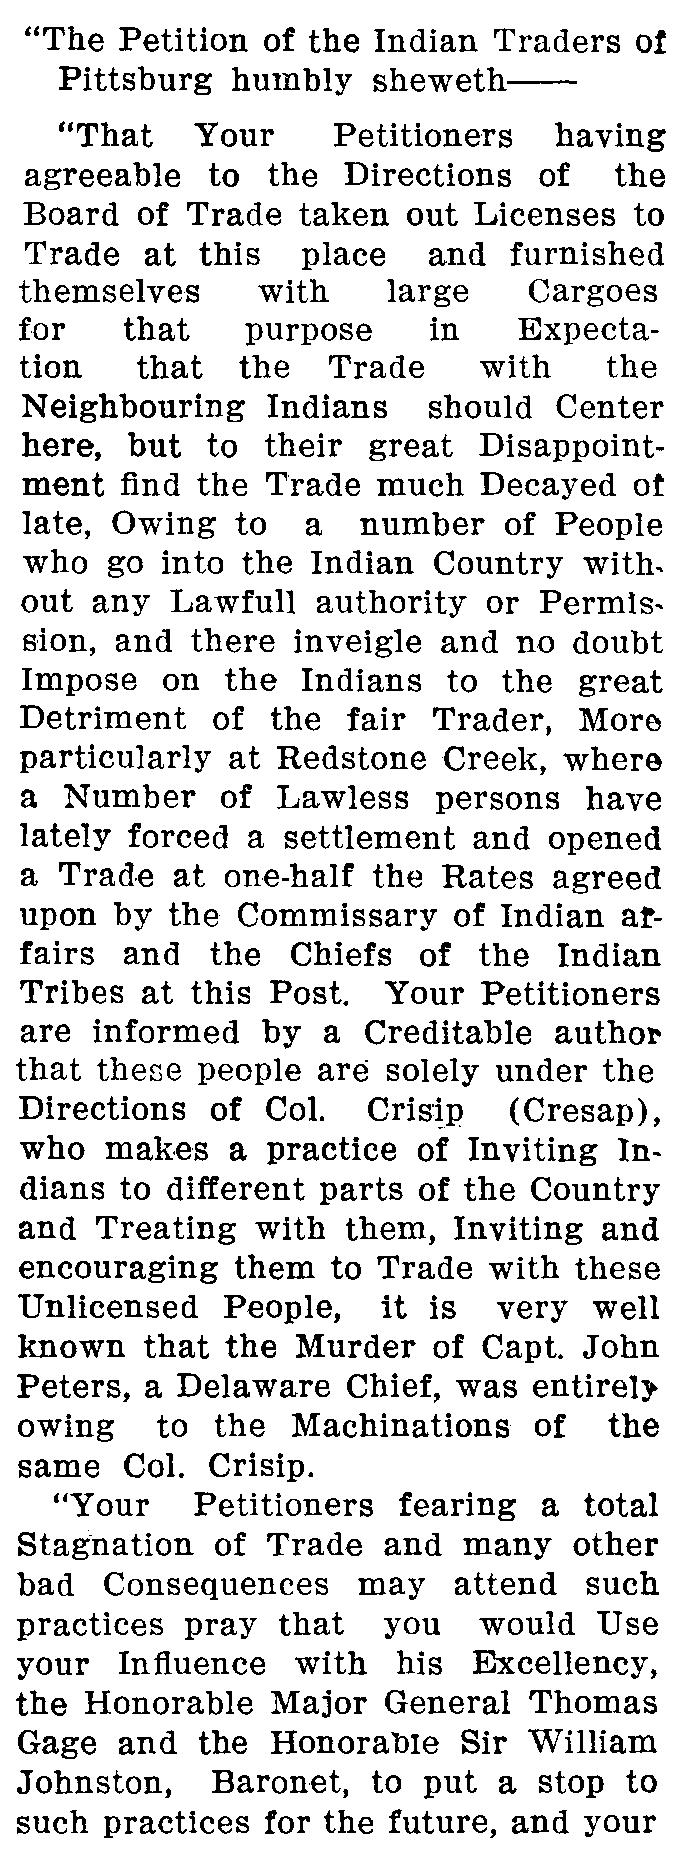 "The Petition of the Indian Traders of Pittsburg humbly sheweth- "That Your Petitioners having agreeable to the Directions of the Board of Trade taken out Licenses to Trade at this place and